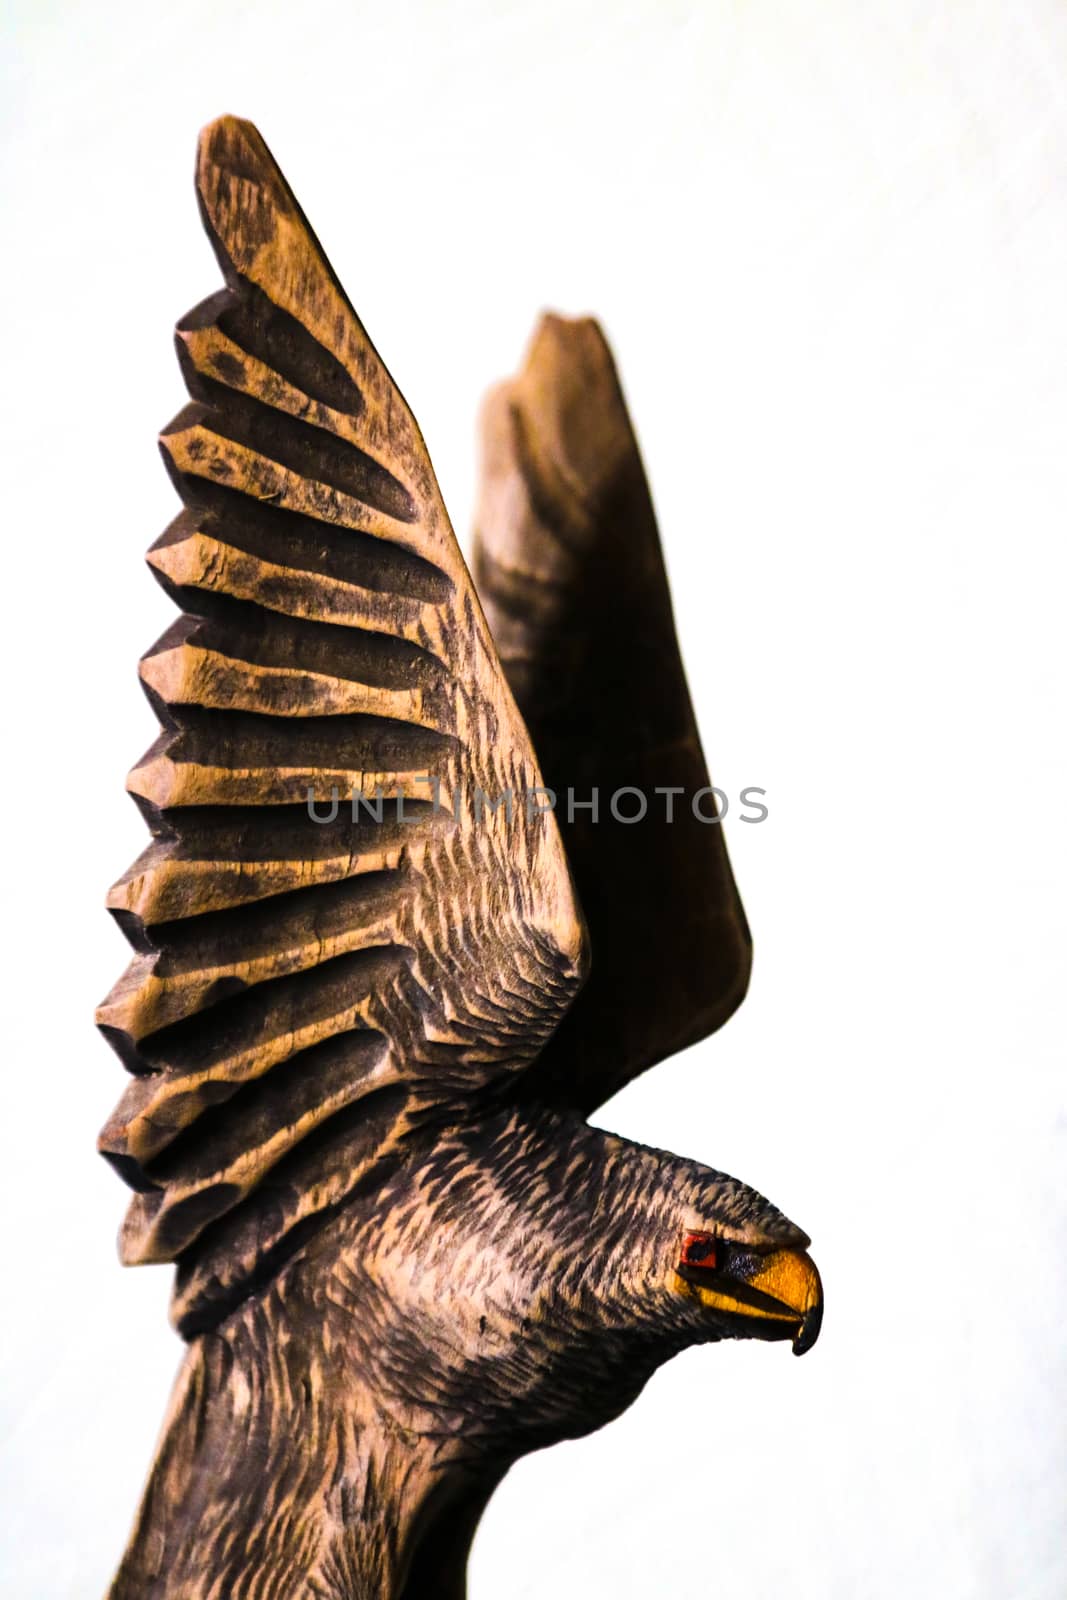 Beautiful wooden figure of an eagle on a white background. by kip02kas